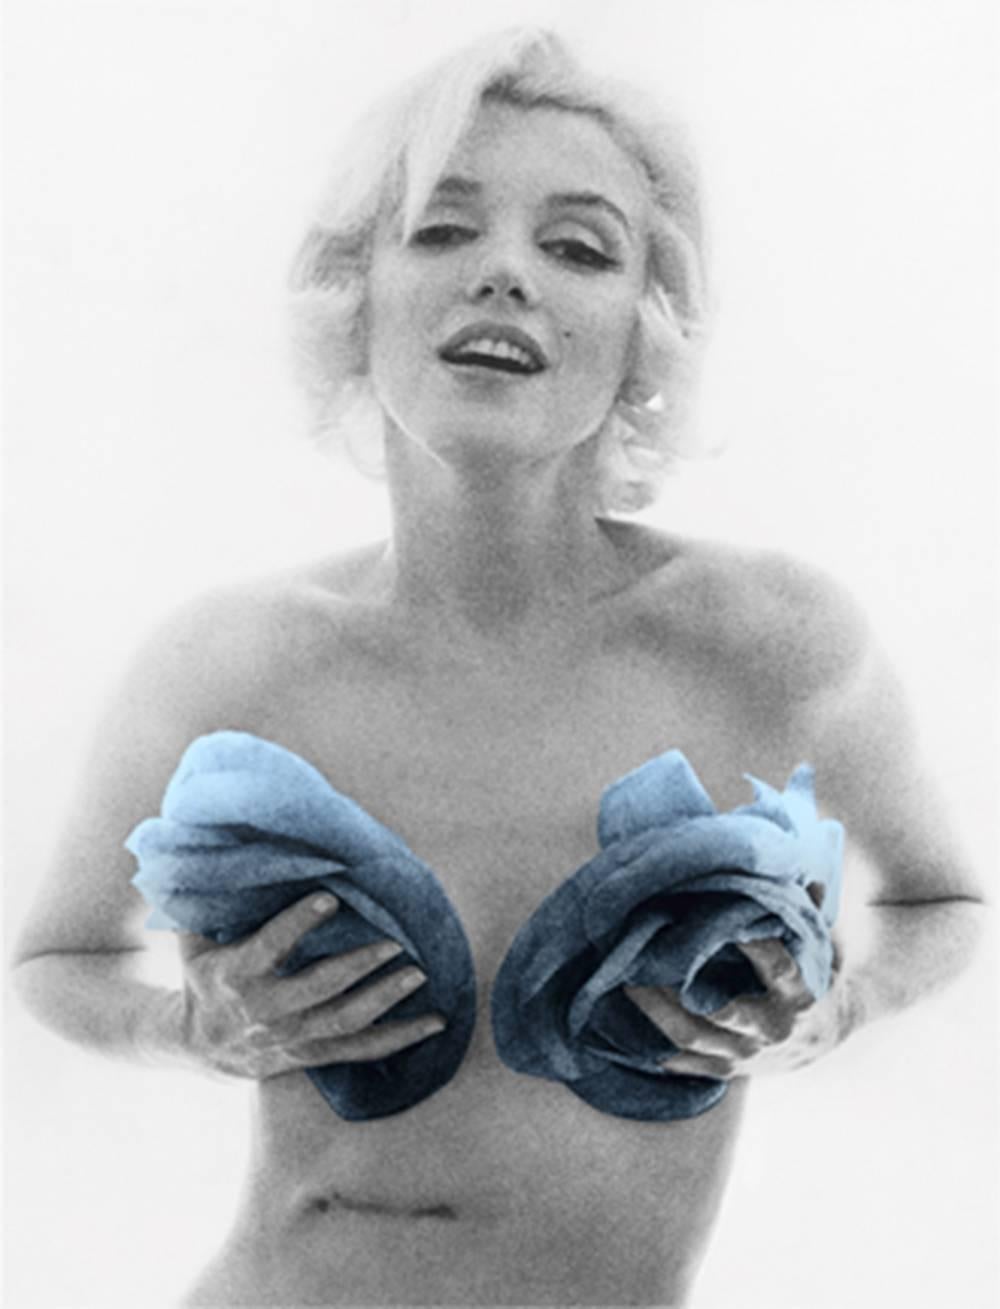 Marilyn Monroe: From "The Last Sitting Ⓡ" (Blue Roses) - Photograph by Bert Stern